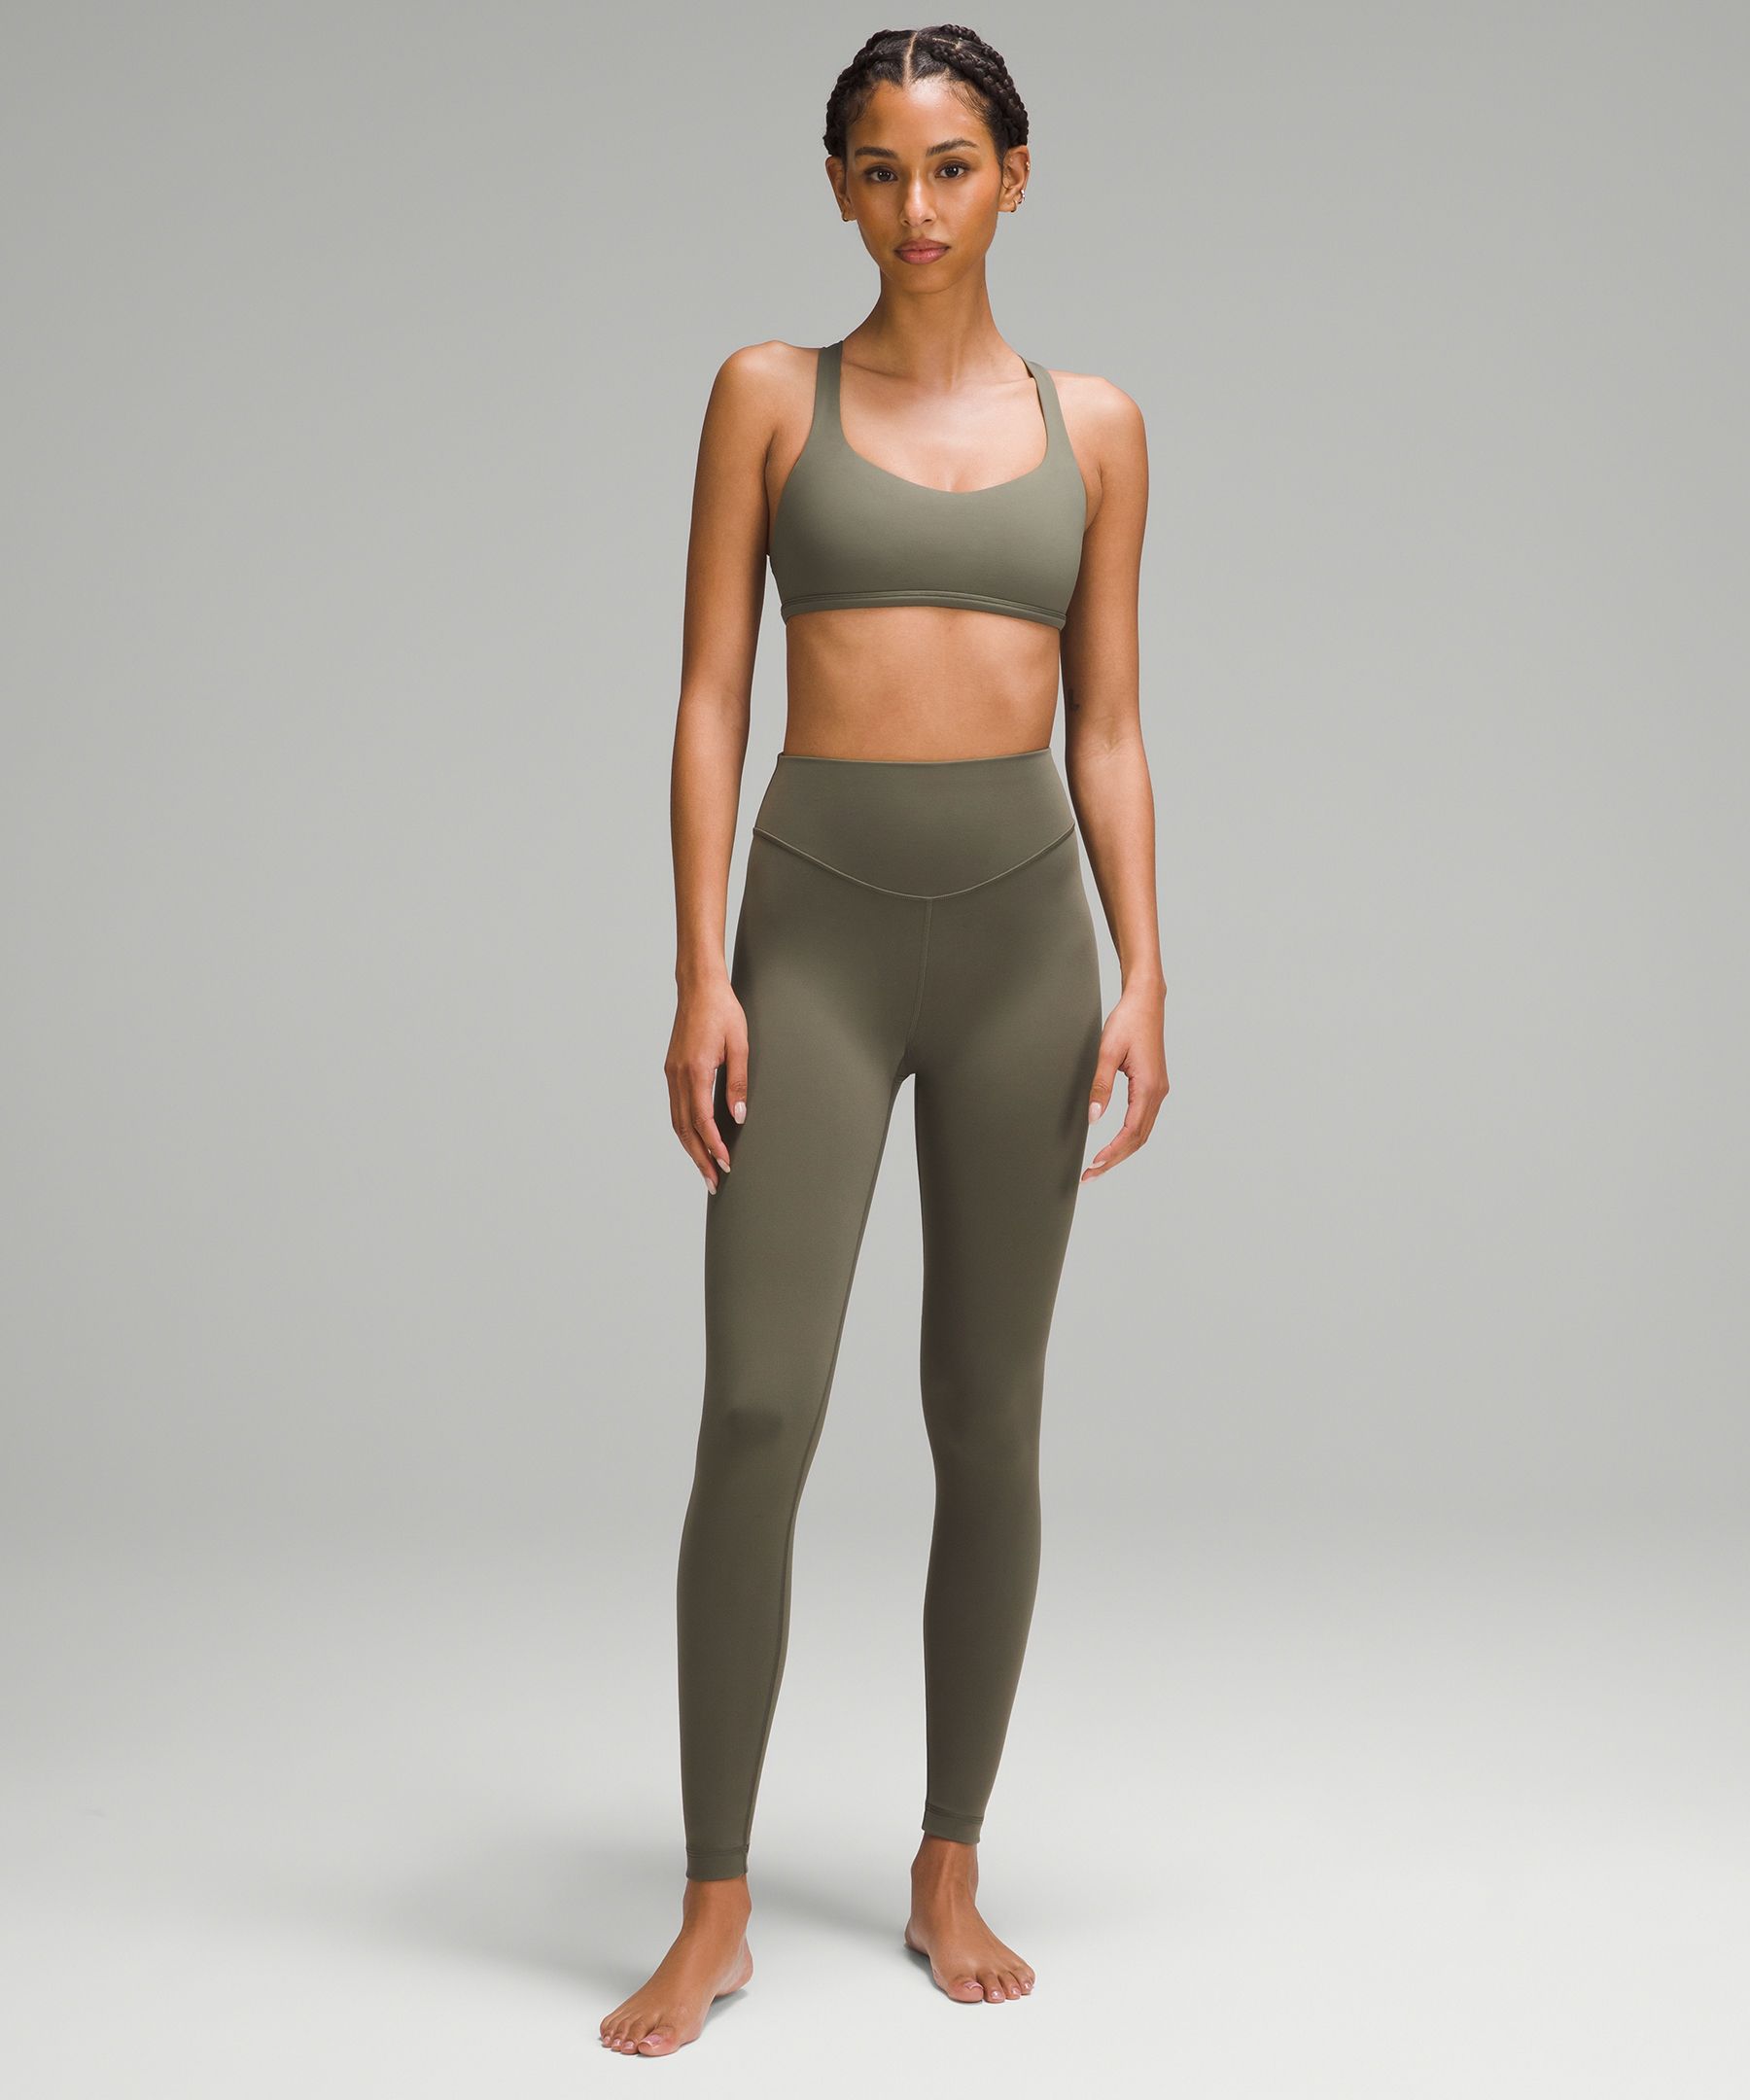 Lululemon LLL WunderUnder High-Rise 25 Incognito Camo Jacquard Alpine White  Starlight 10 - $53 - From Shayna